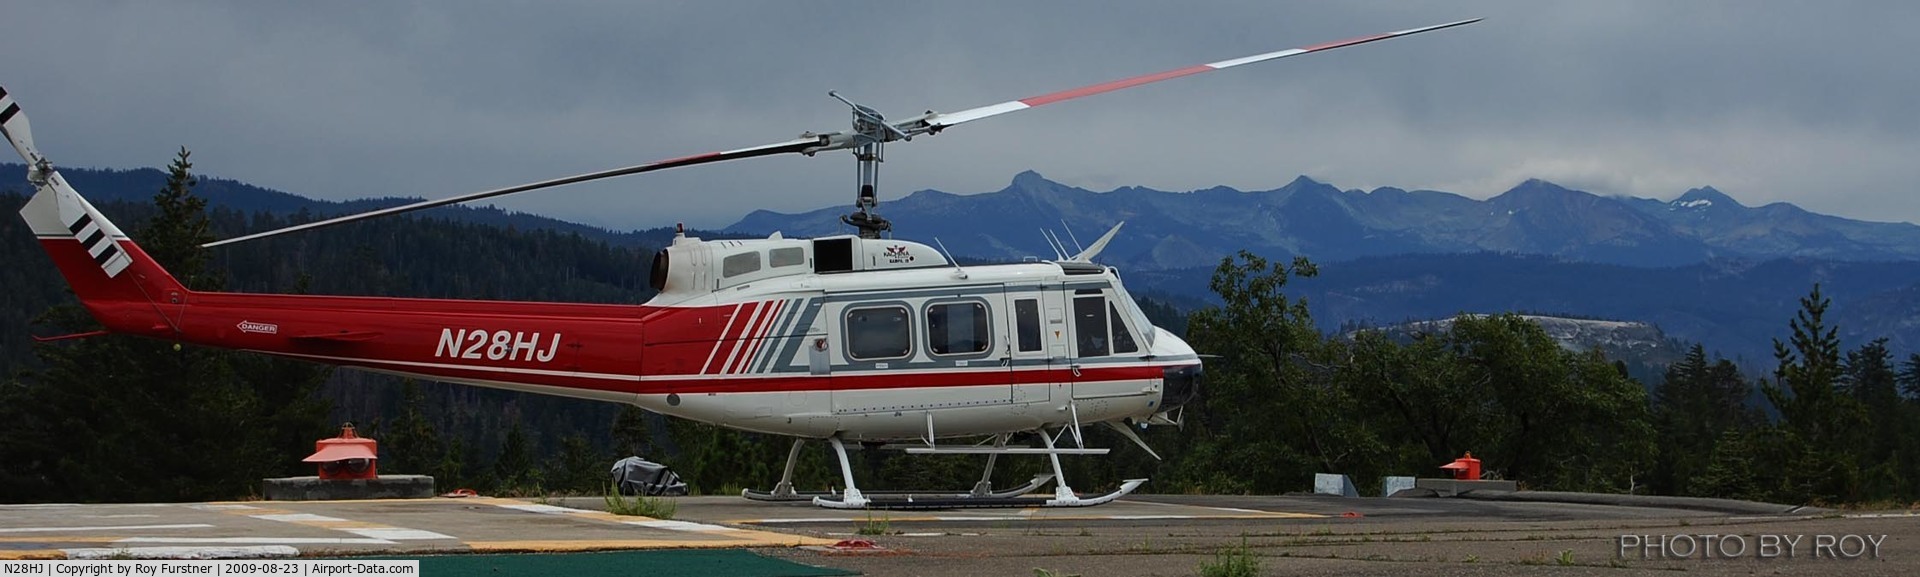 N28HJ, 1968 Bell 205A-1 C/N 30006, at Yosemite park fire lookout